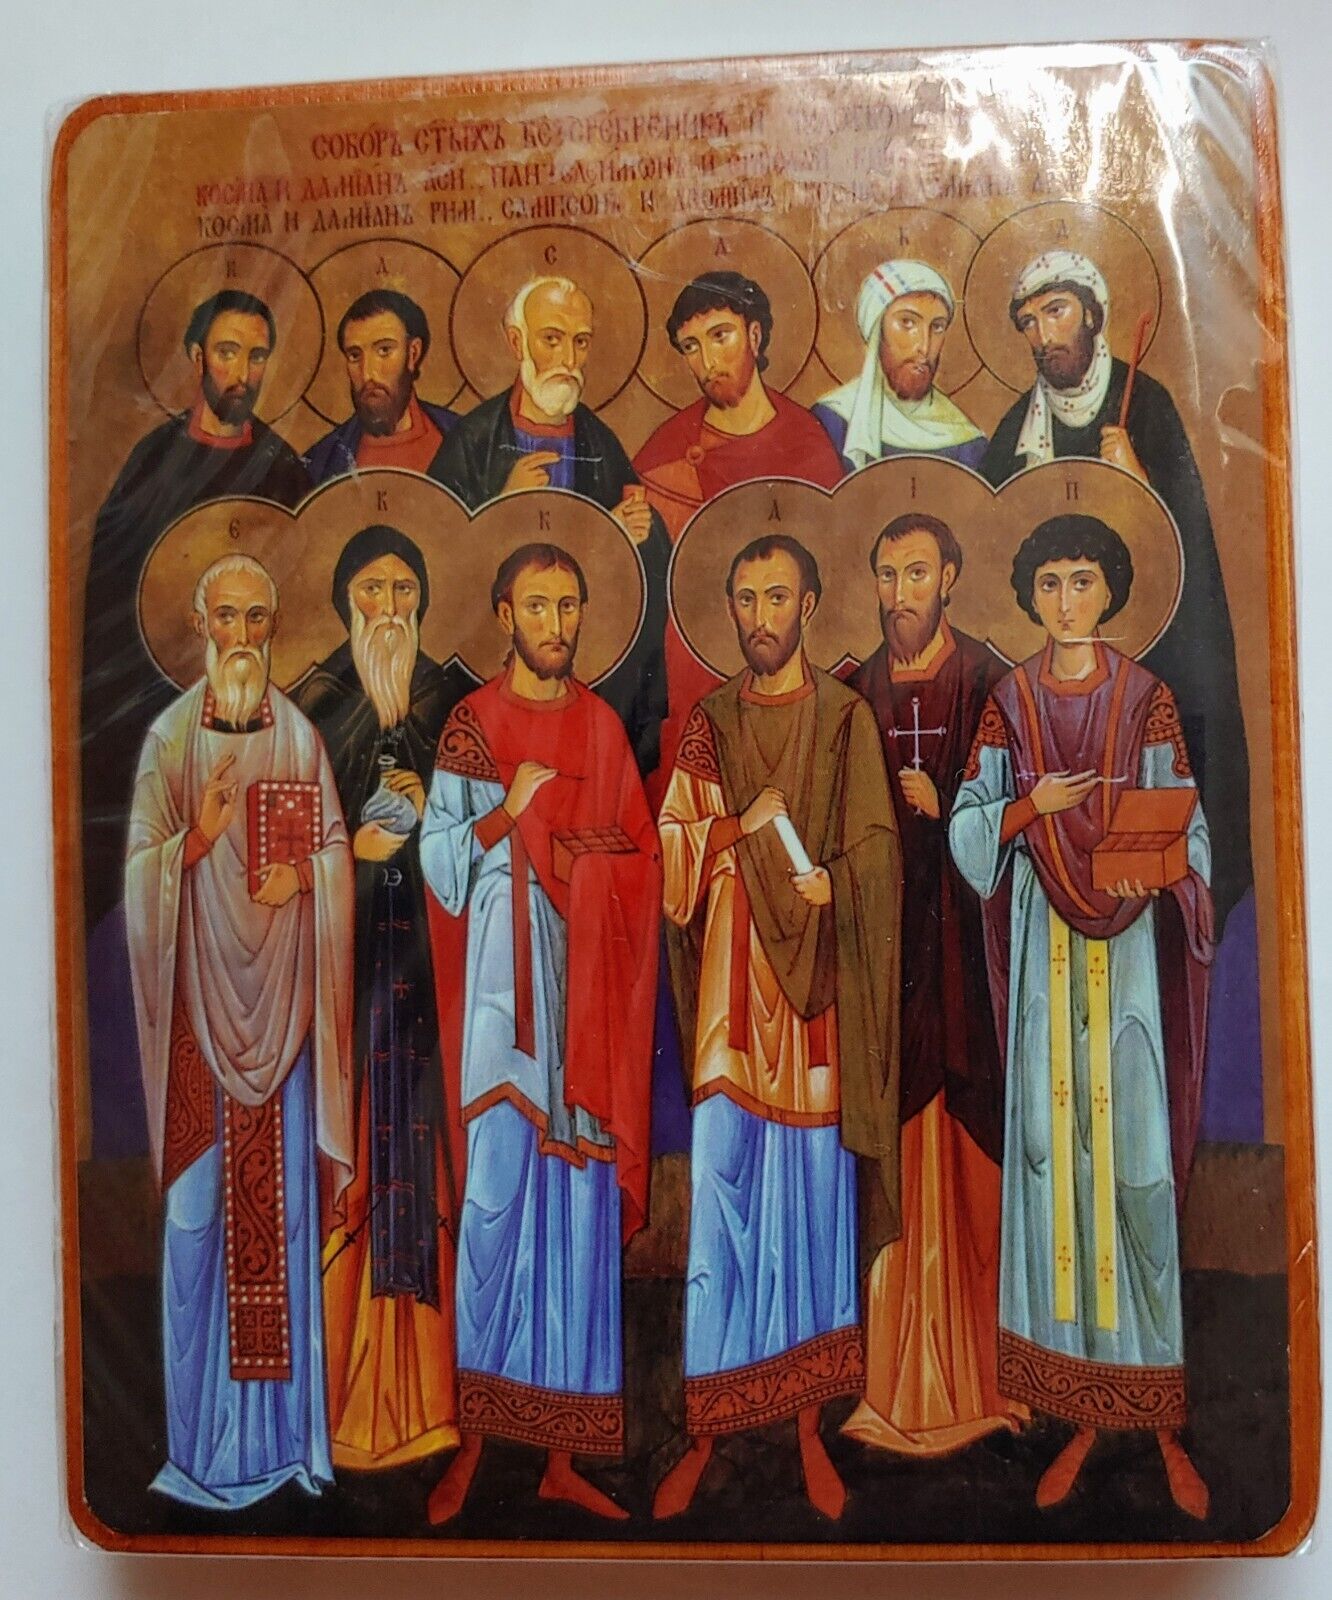 Synaxis of the Holy Healers